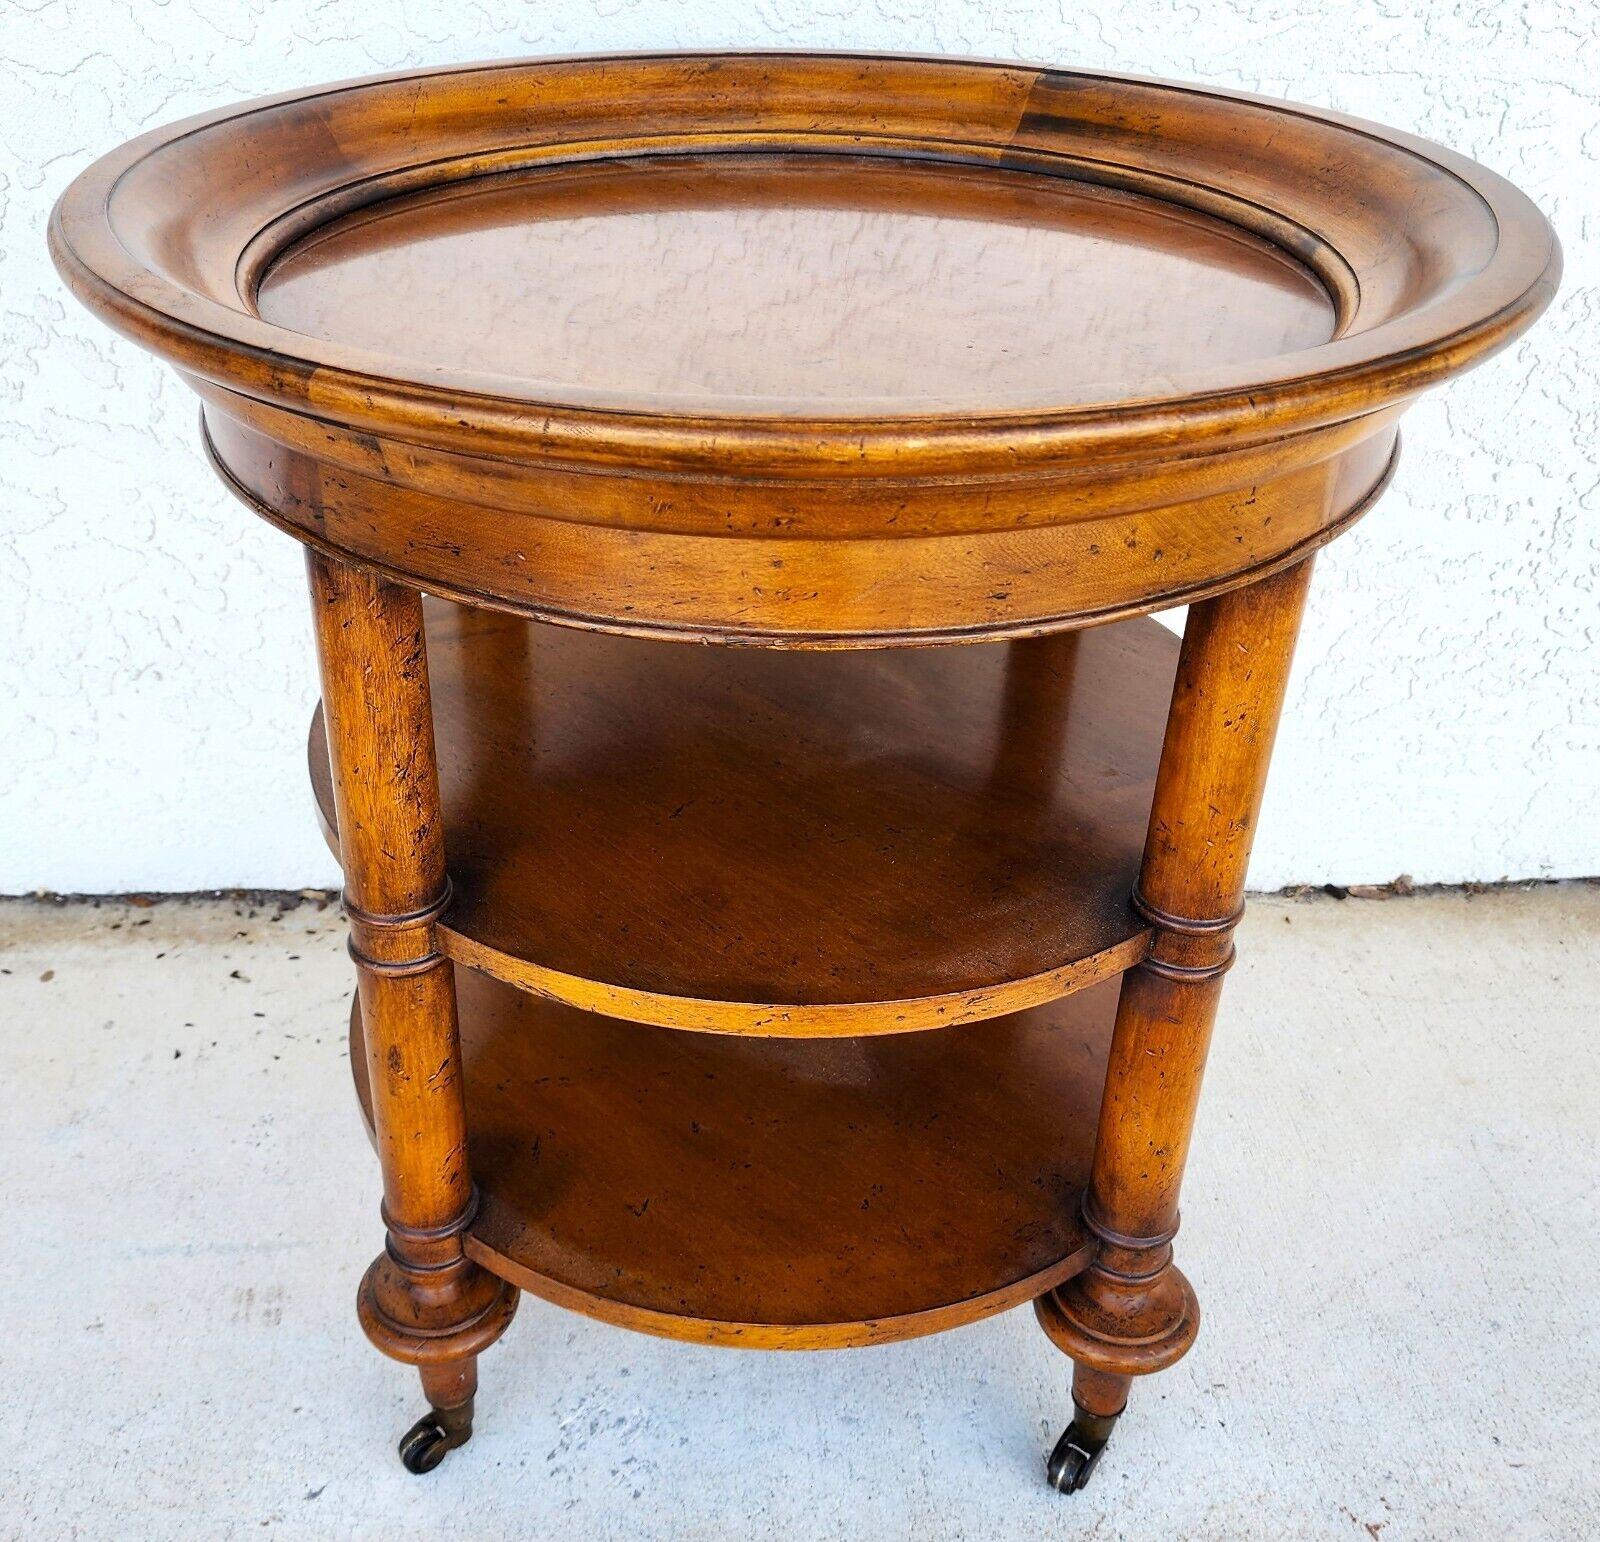 For FULL item description click on CONTINUE READING at the bottom of this page.

Offering One Of Our Recent Palm Beach Estate Fine Furniture Acquisitions Of A
Center End Side Occasional Table 3-Tier in Solid Distressed Fruitwood by BAKER
Very